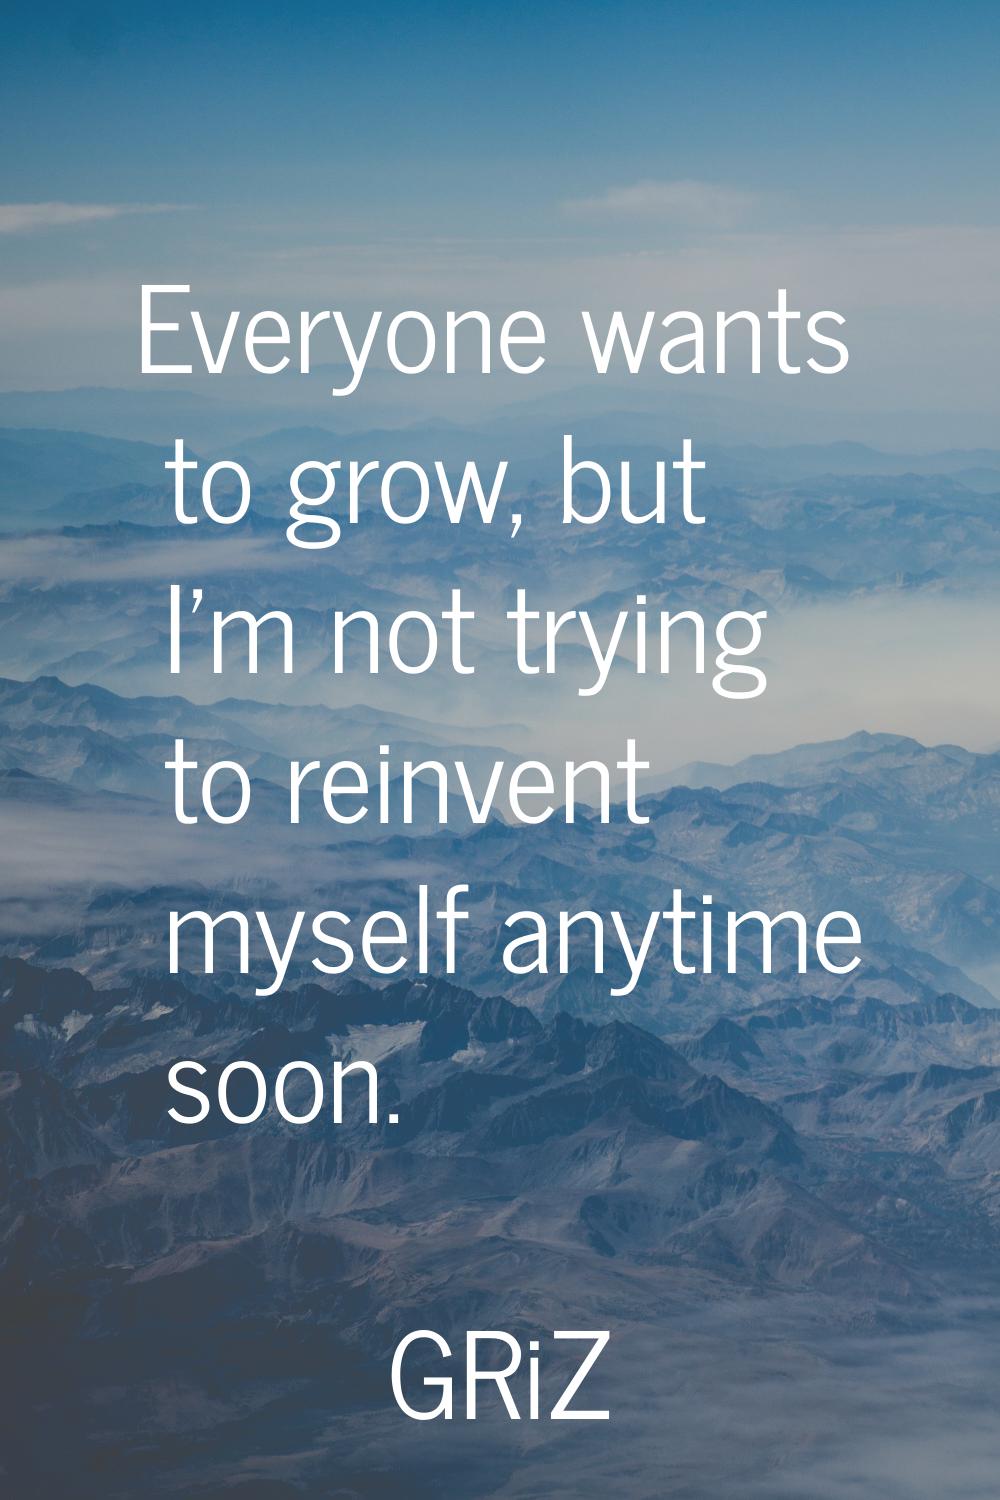 Everyone wants to grow, but I'm not trying to reinvent myself anytime soon.